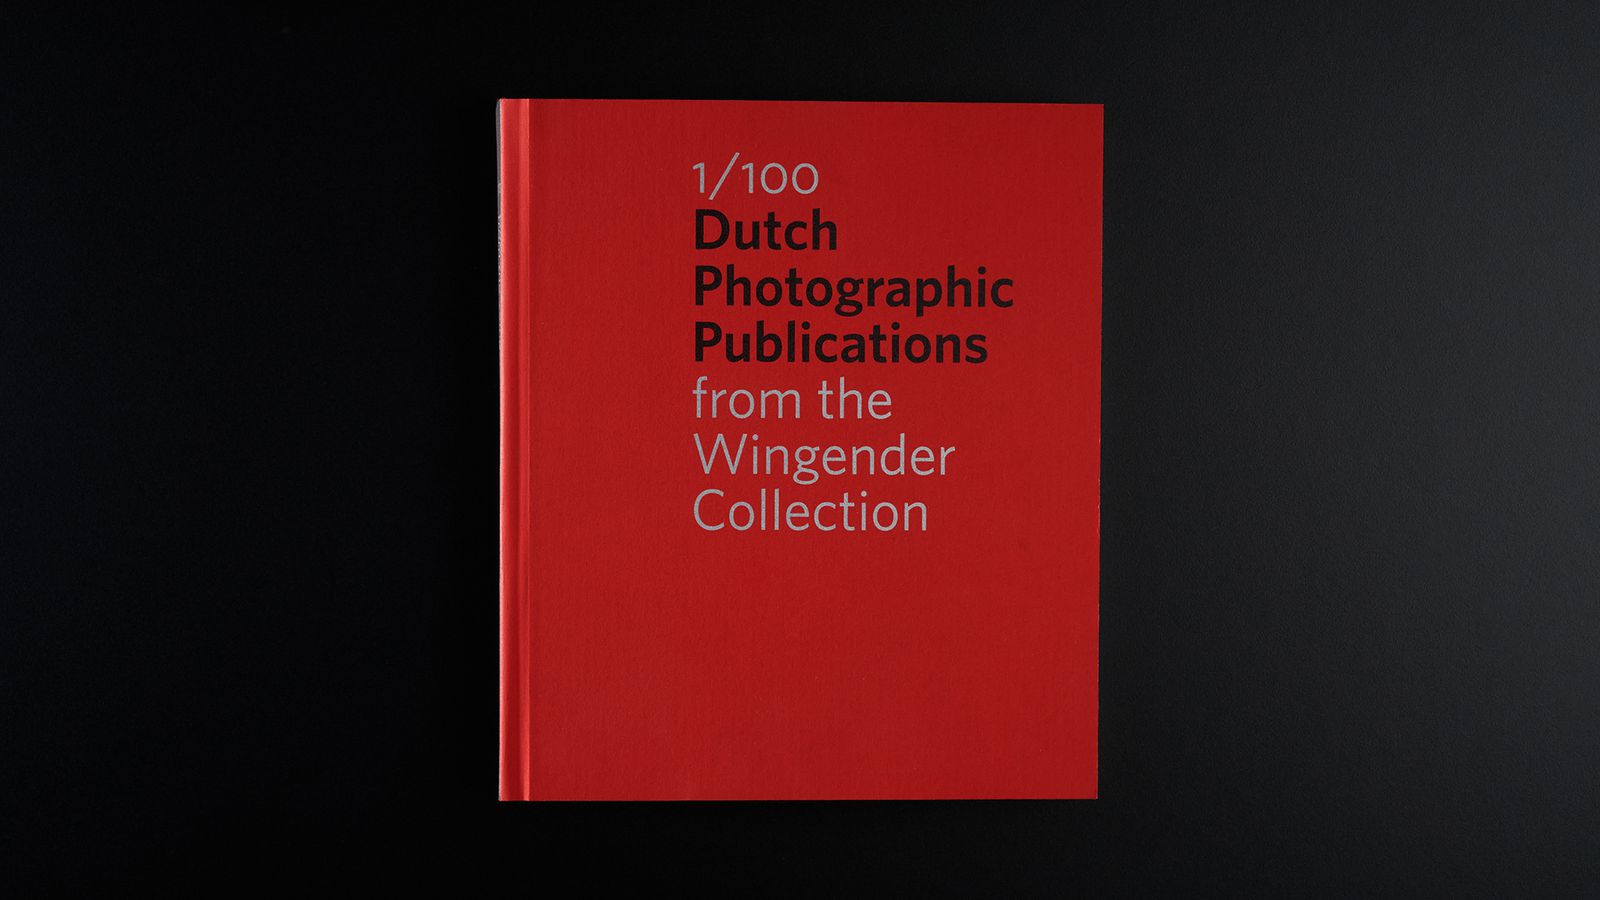 Dutch photographic publicatons from the Wingender Collection - Cover.jpg